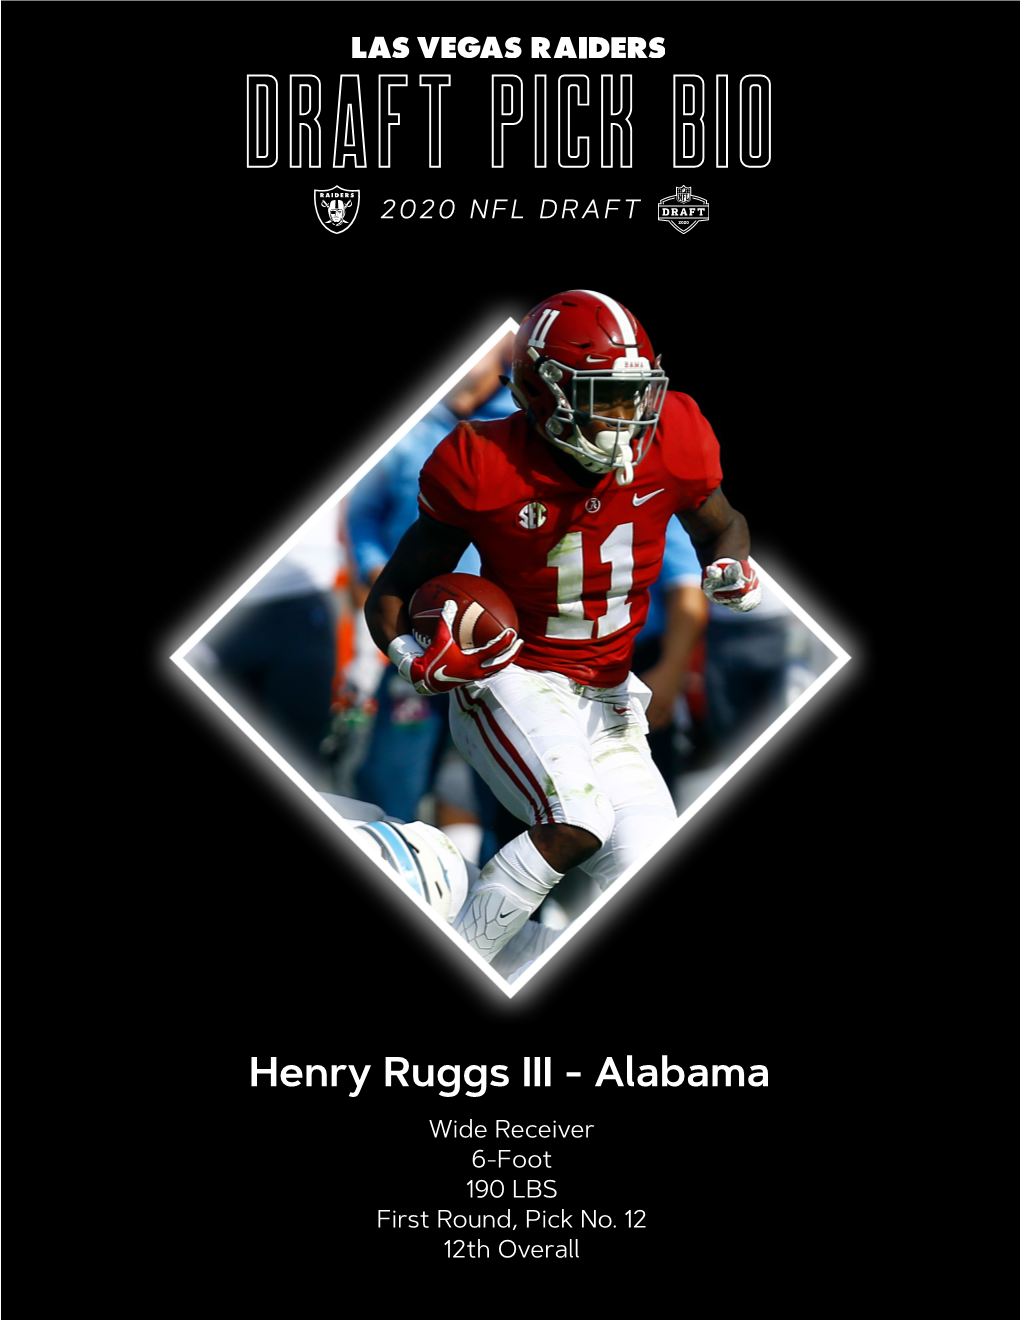 Henry Ruggs III - Alabama Wide Receiver 6-Foot 190 LBS First Round, Pick No